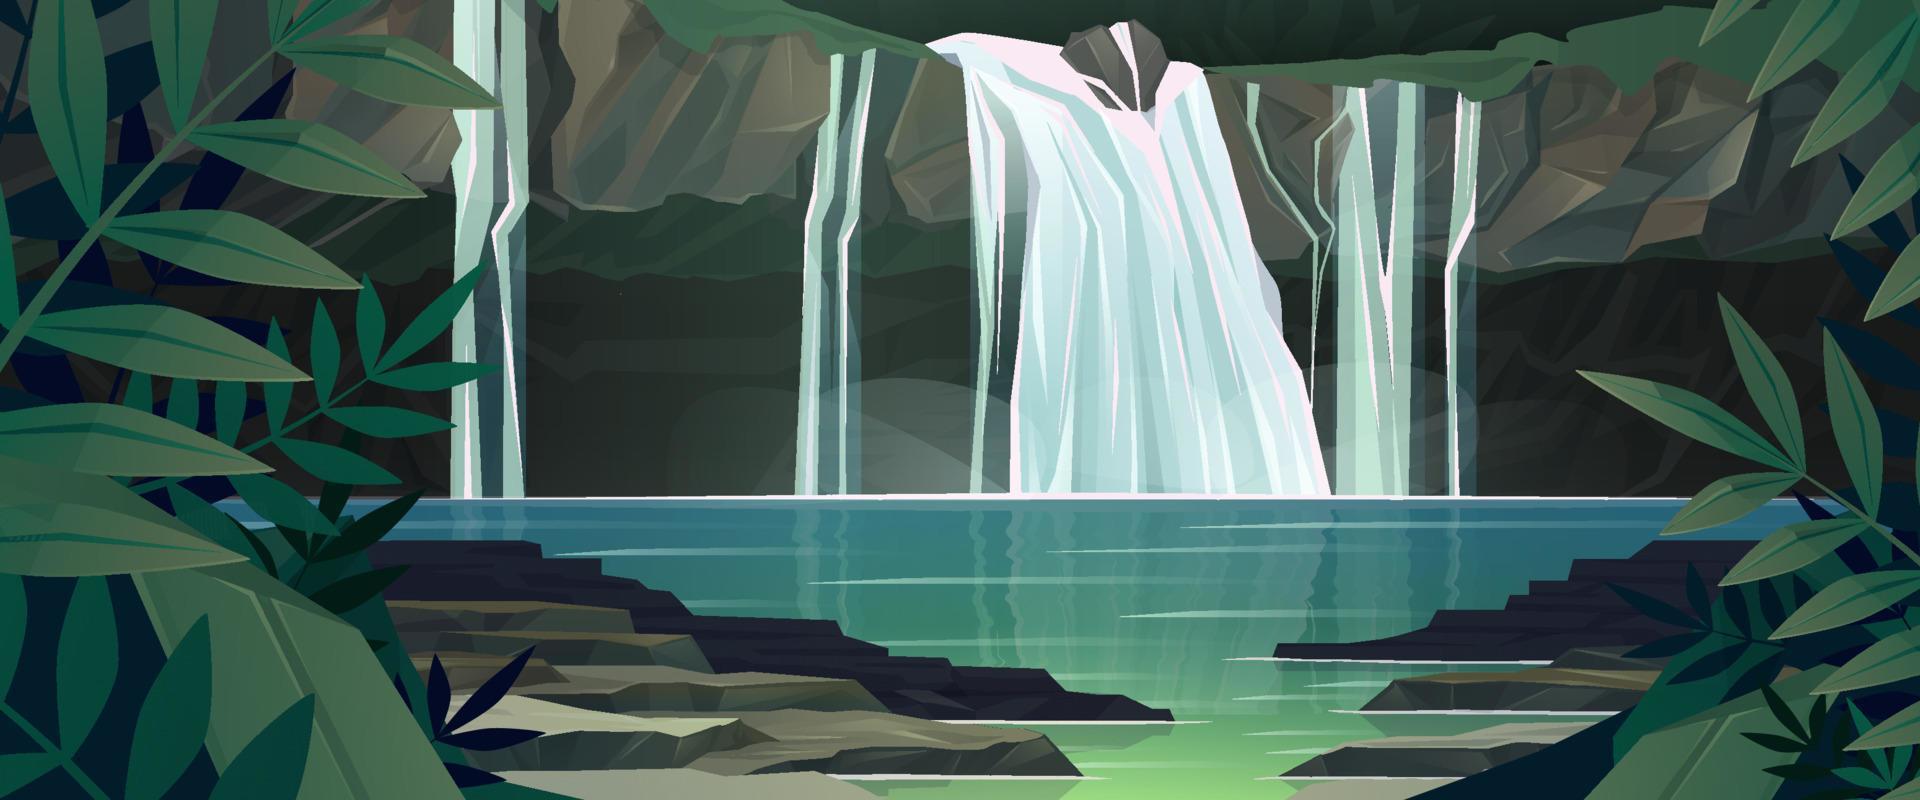 Waterfall in jungle with trees and mountains vector